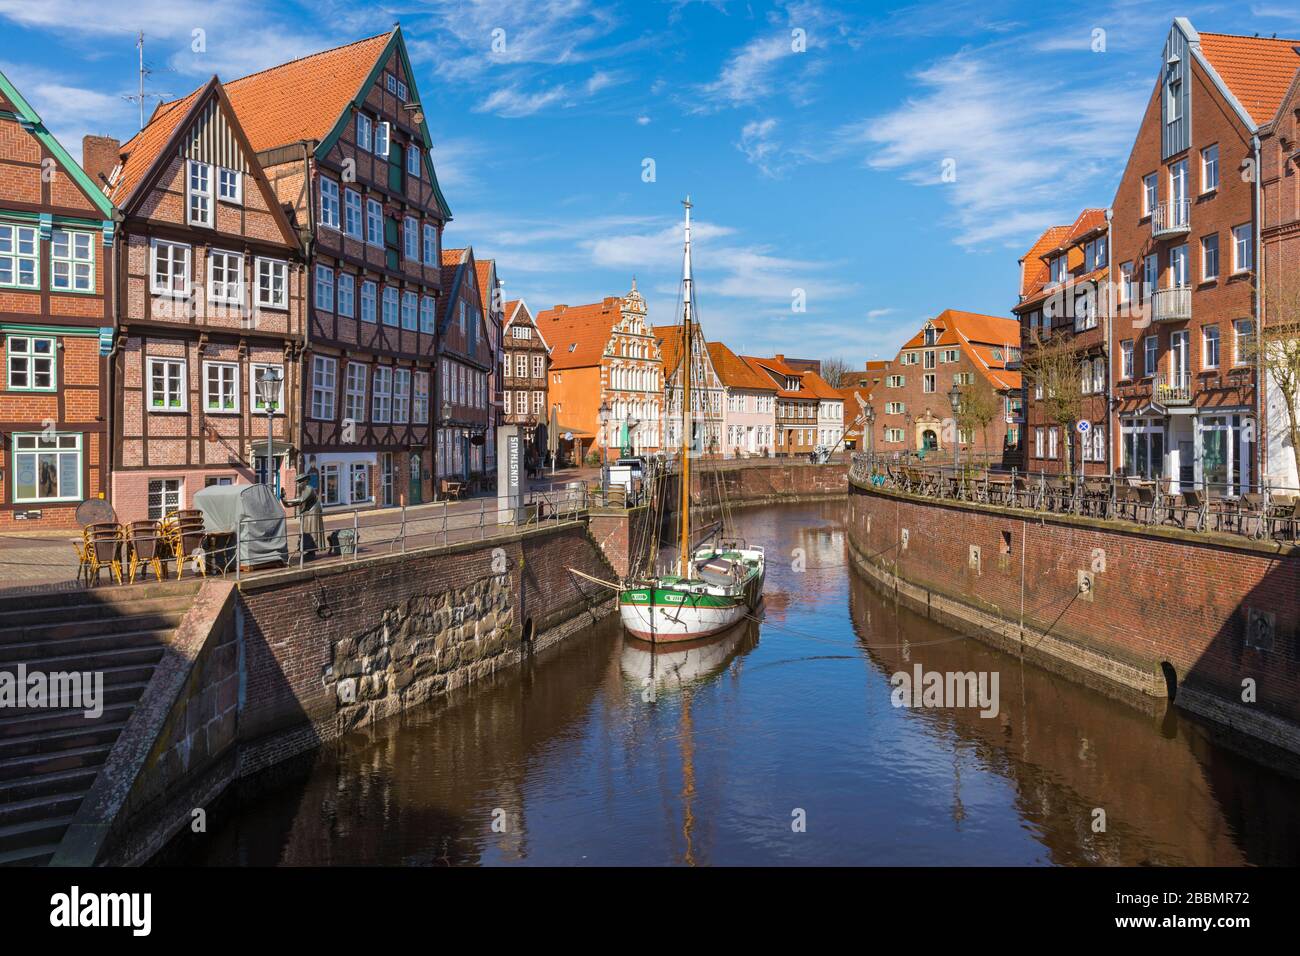 Old harbor with half-timbered houses and historic flat bottom boat at the old town of Stade, Lower Saxony, Germany Stock Photo